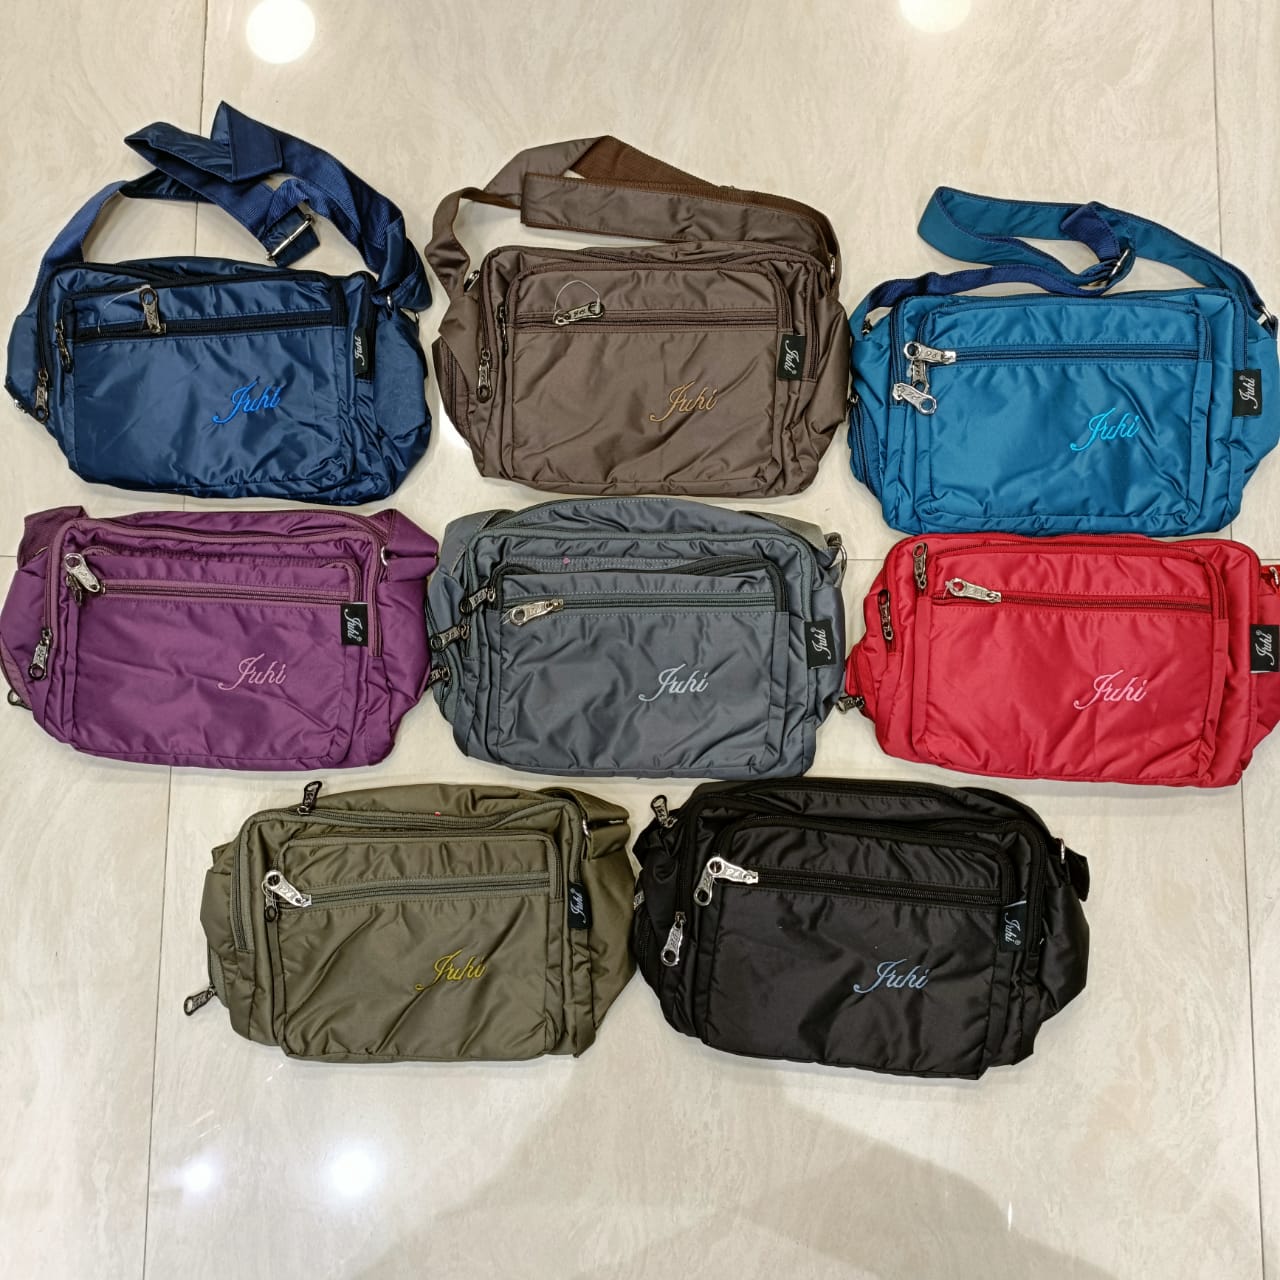 Abc's 7 pocket sling bag with seperate bottle and umbrella compartment